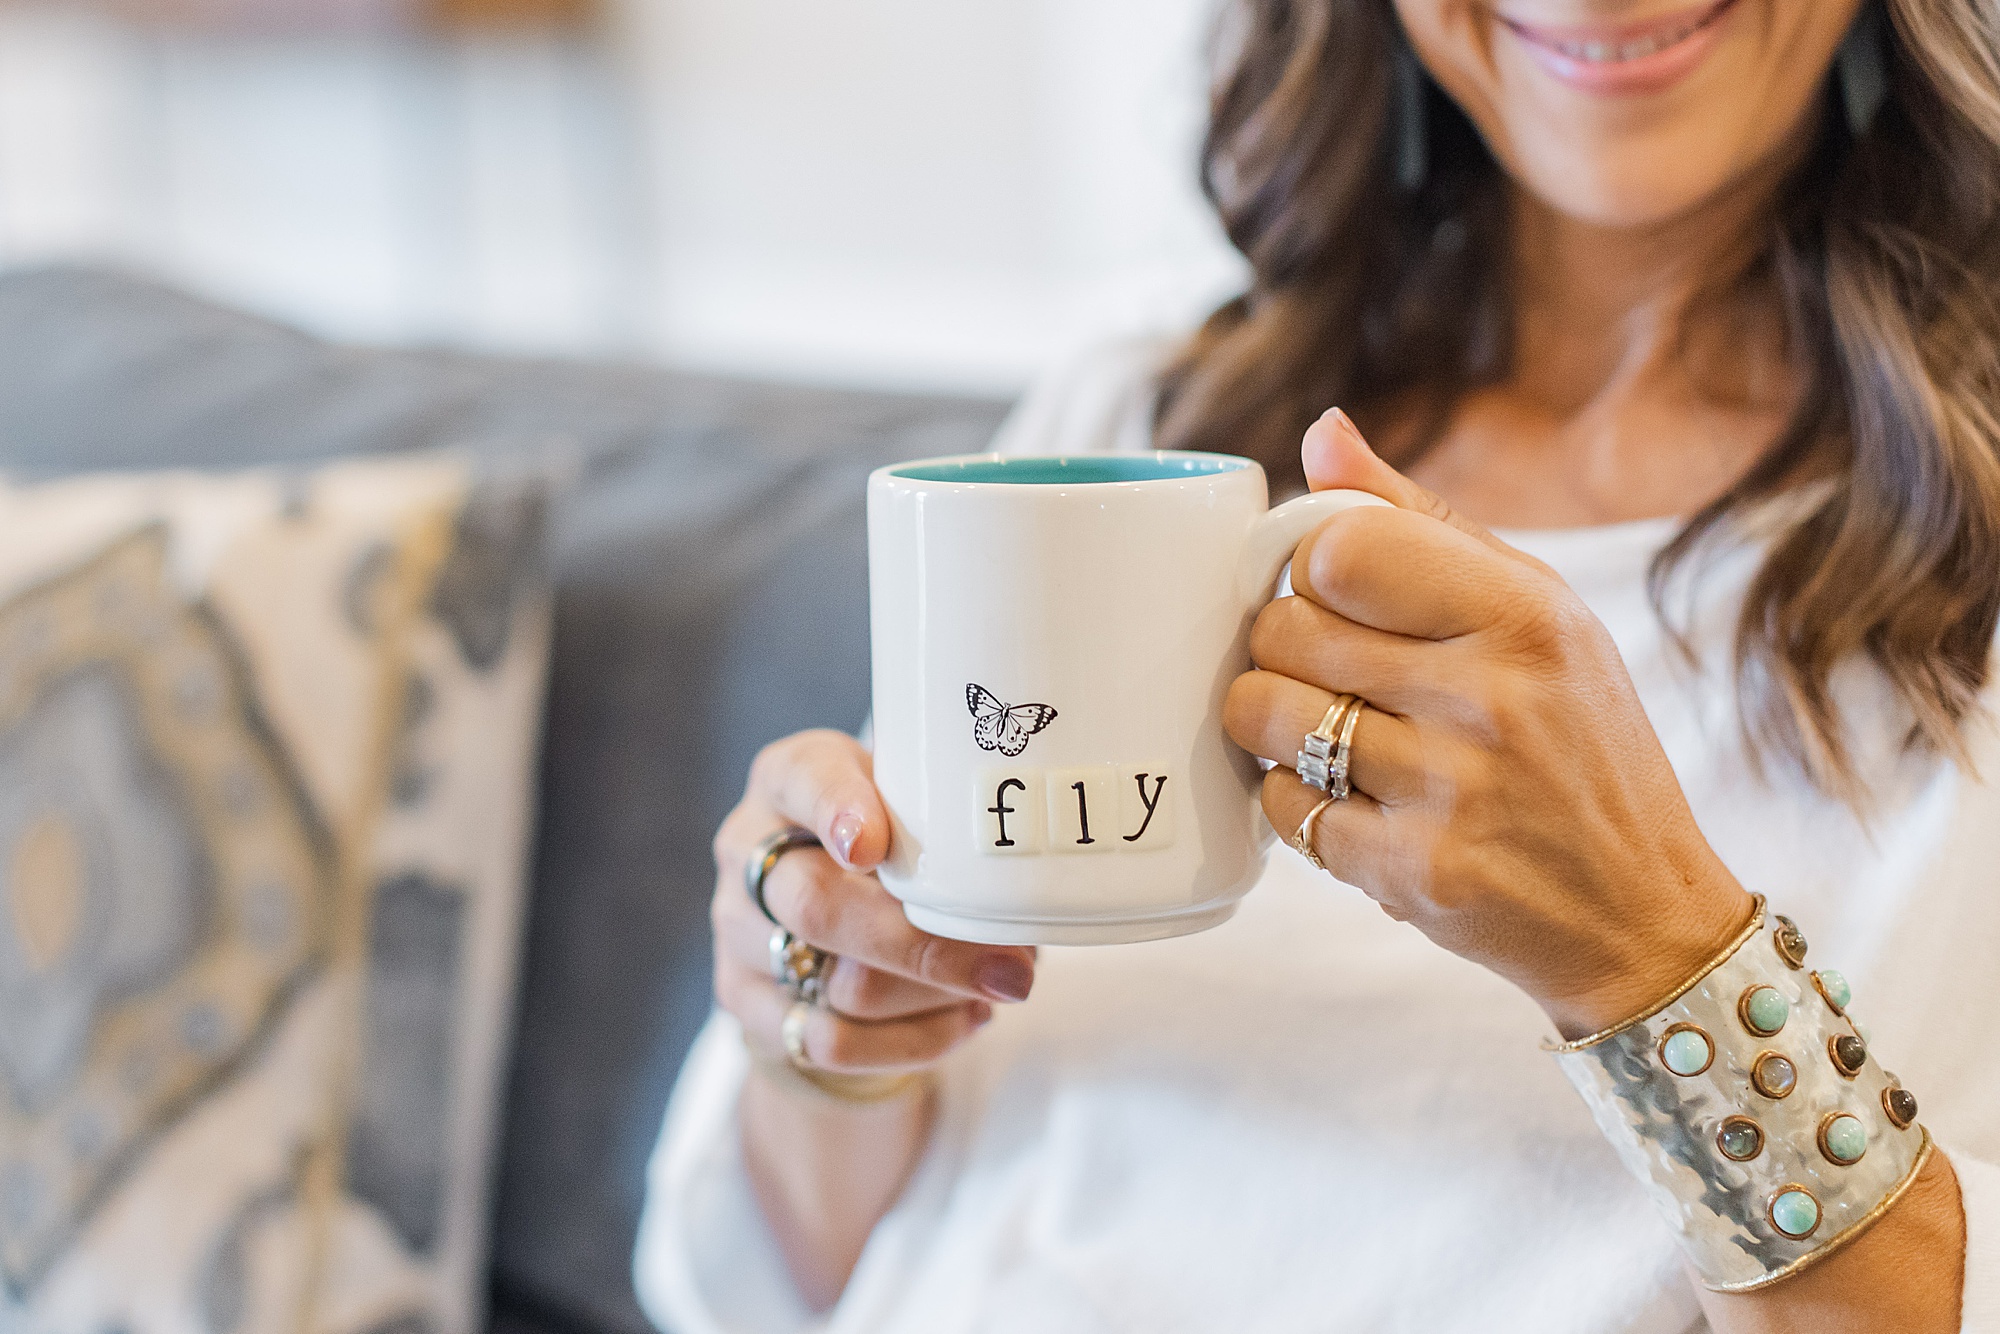 woman holds coffee mug on couch during Franklin branding photos